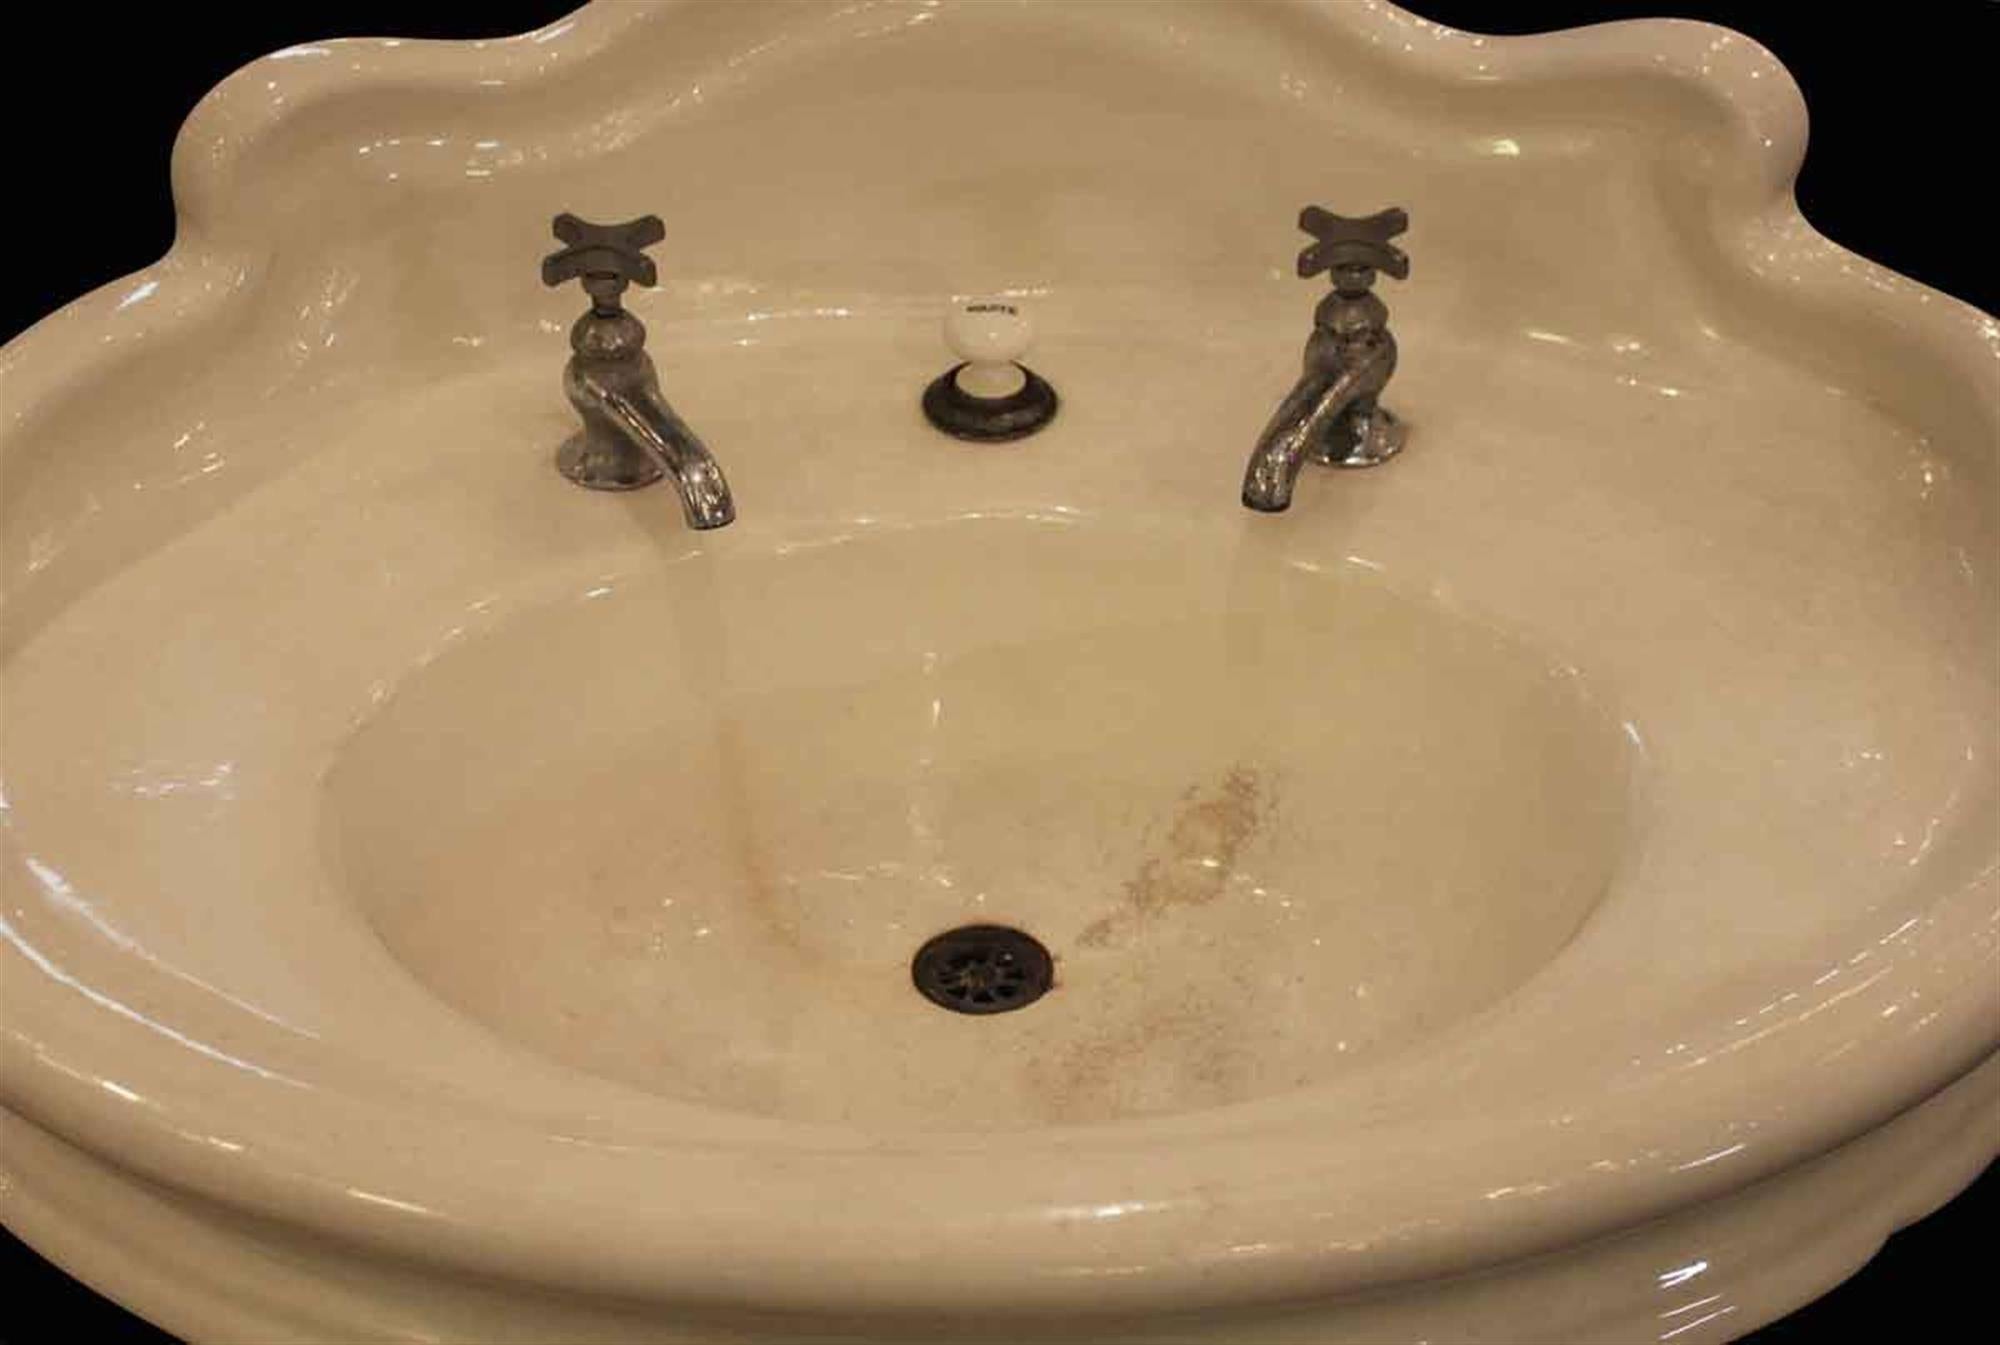 1900s earthenware pedestal oval sink with back splash and original hardware. This is a rare find in very good condition. This can be seen at our 149 Madison Ave location in Manhattan.